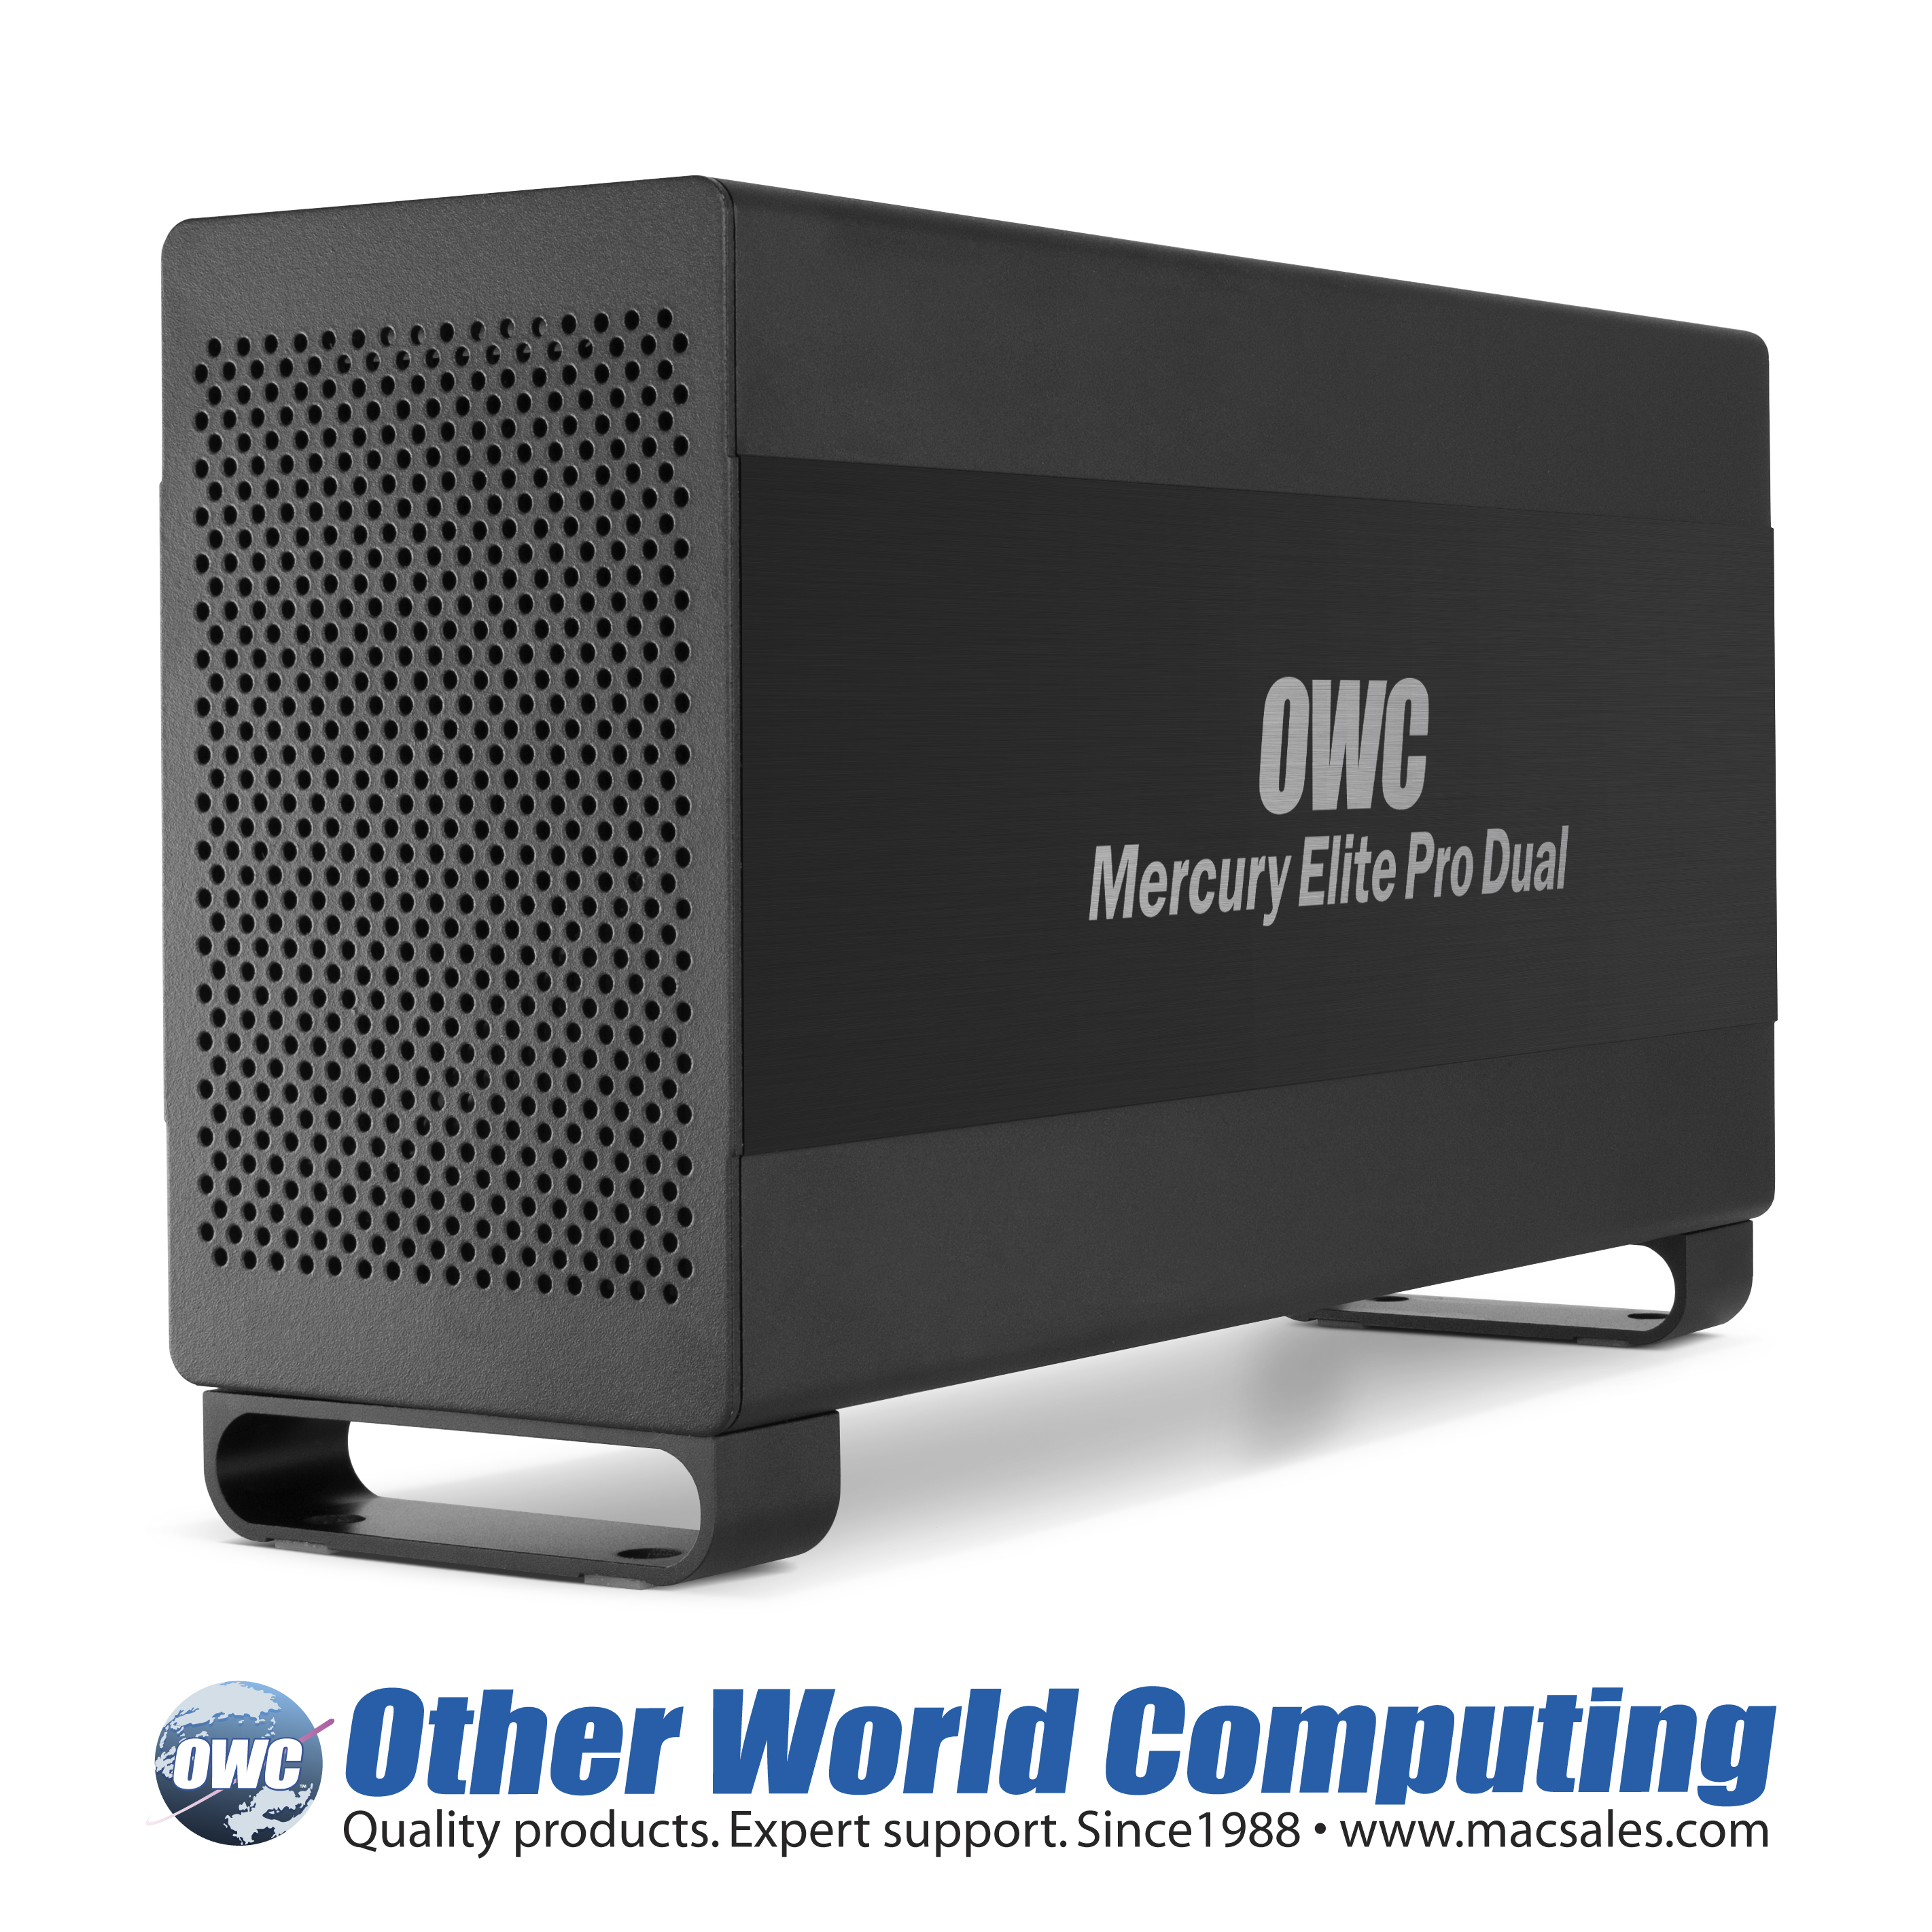 OWC Mercury Elite Pro Dual with Thunderbolt Technology Now in 10TB Capacity